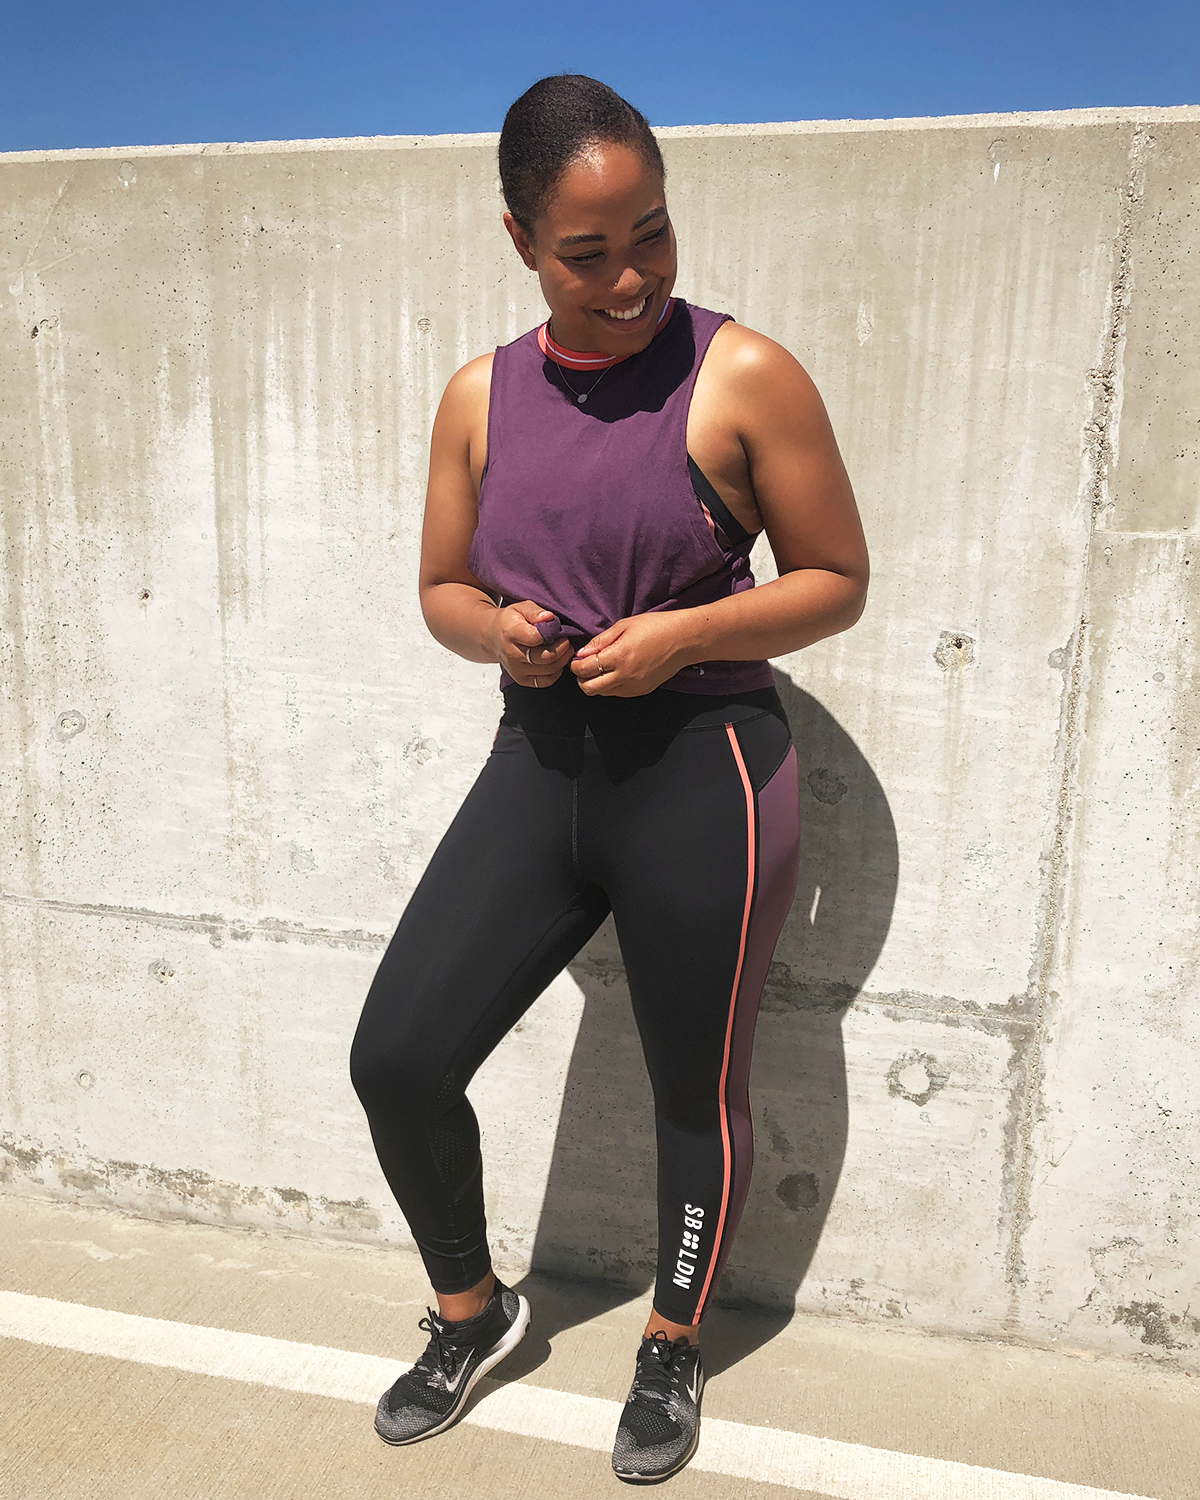 A review of Sweaty Betty's activewear